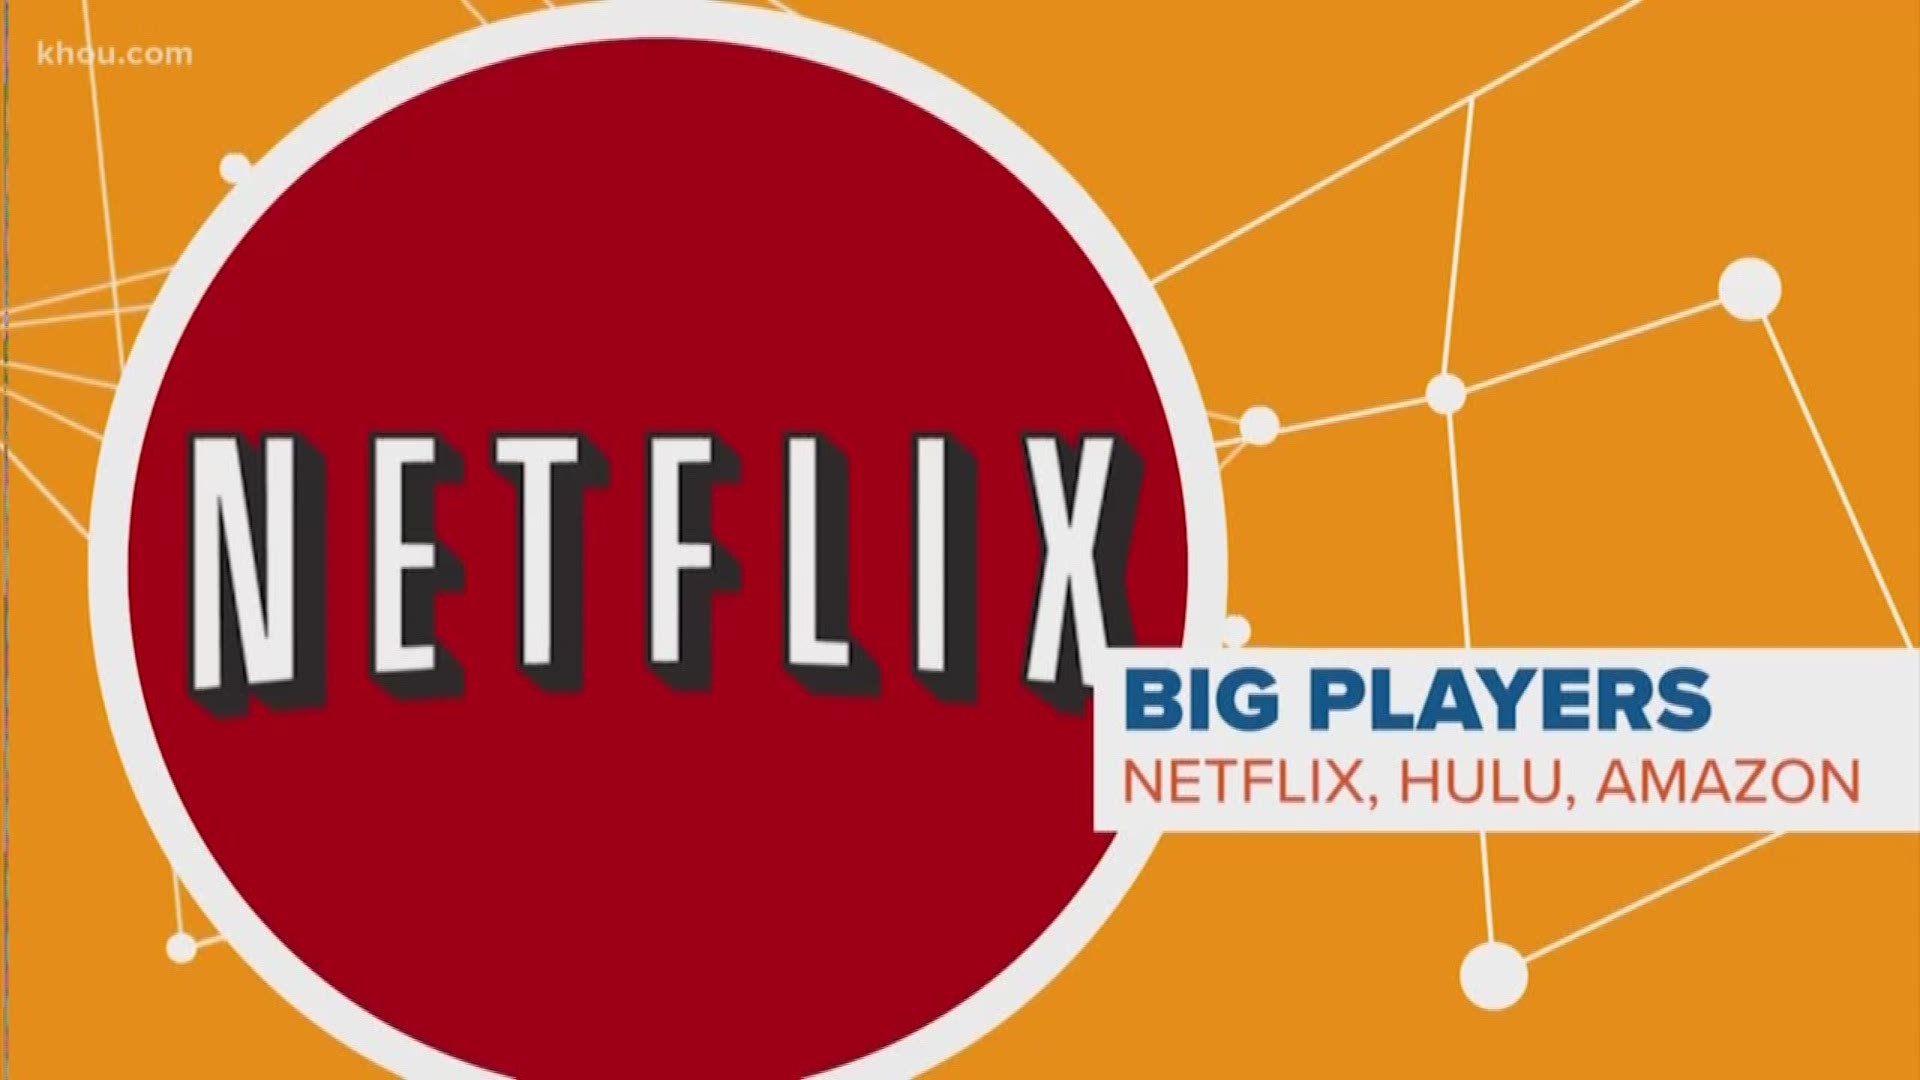 This is not the news binge-watchers want to hear - Netflix raising its prices again! So what does this mean for the future of streaming? Our Rekha Muddaraj connects the dots.